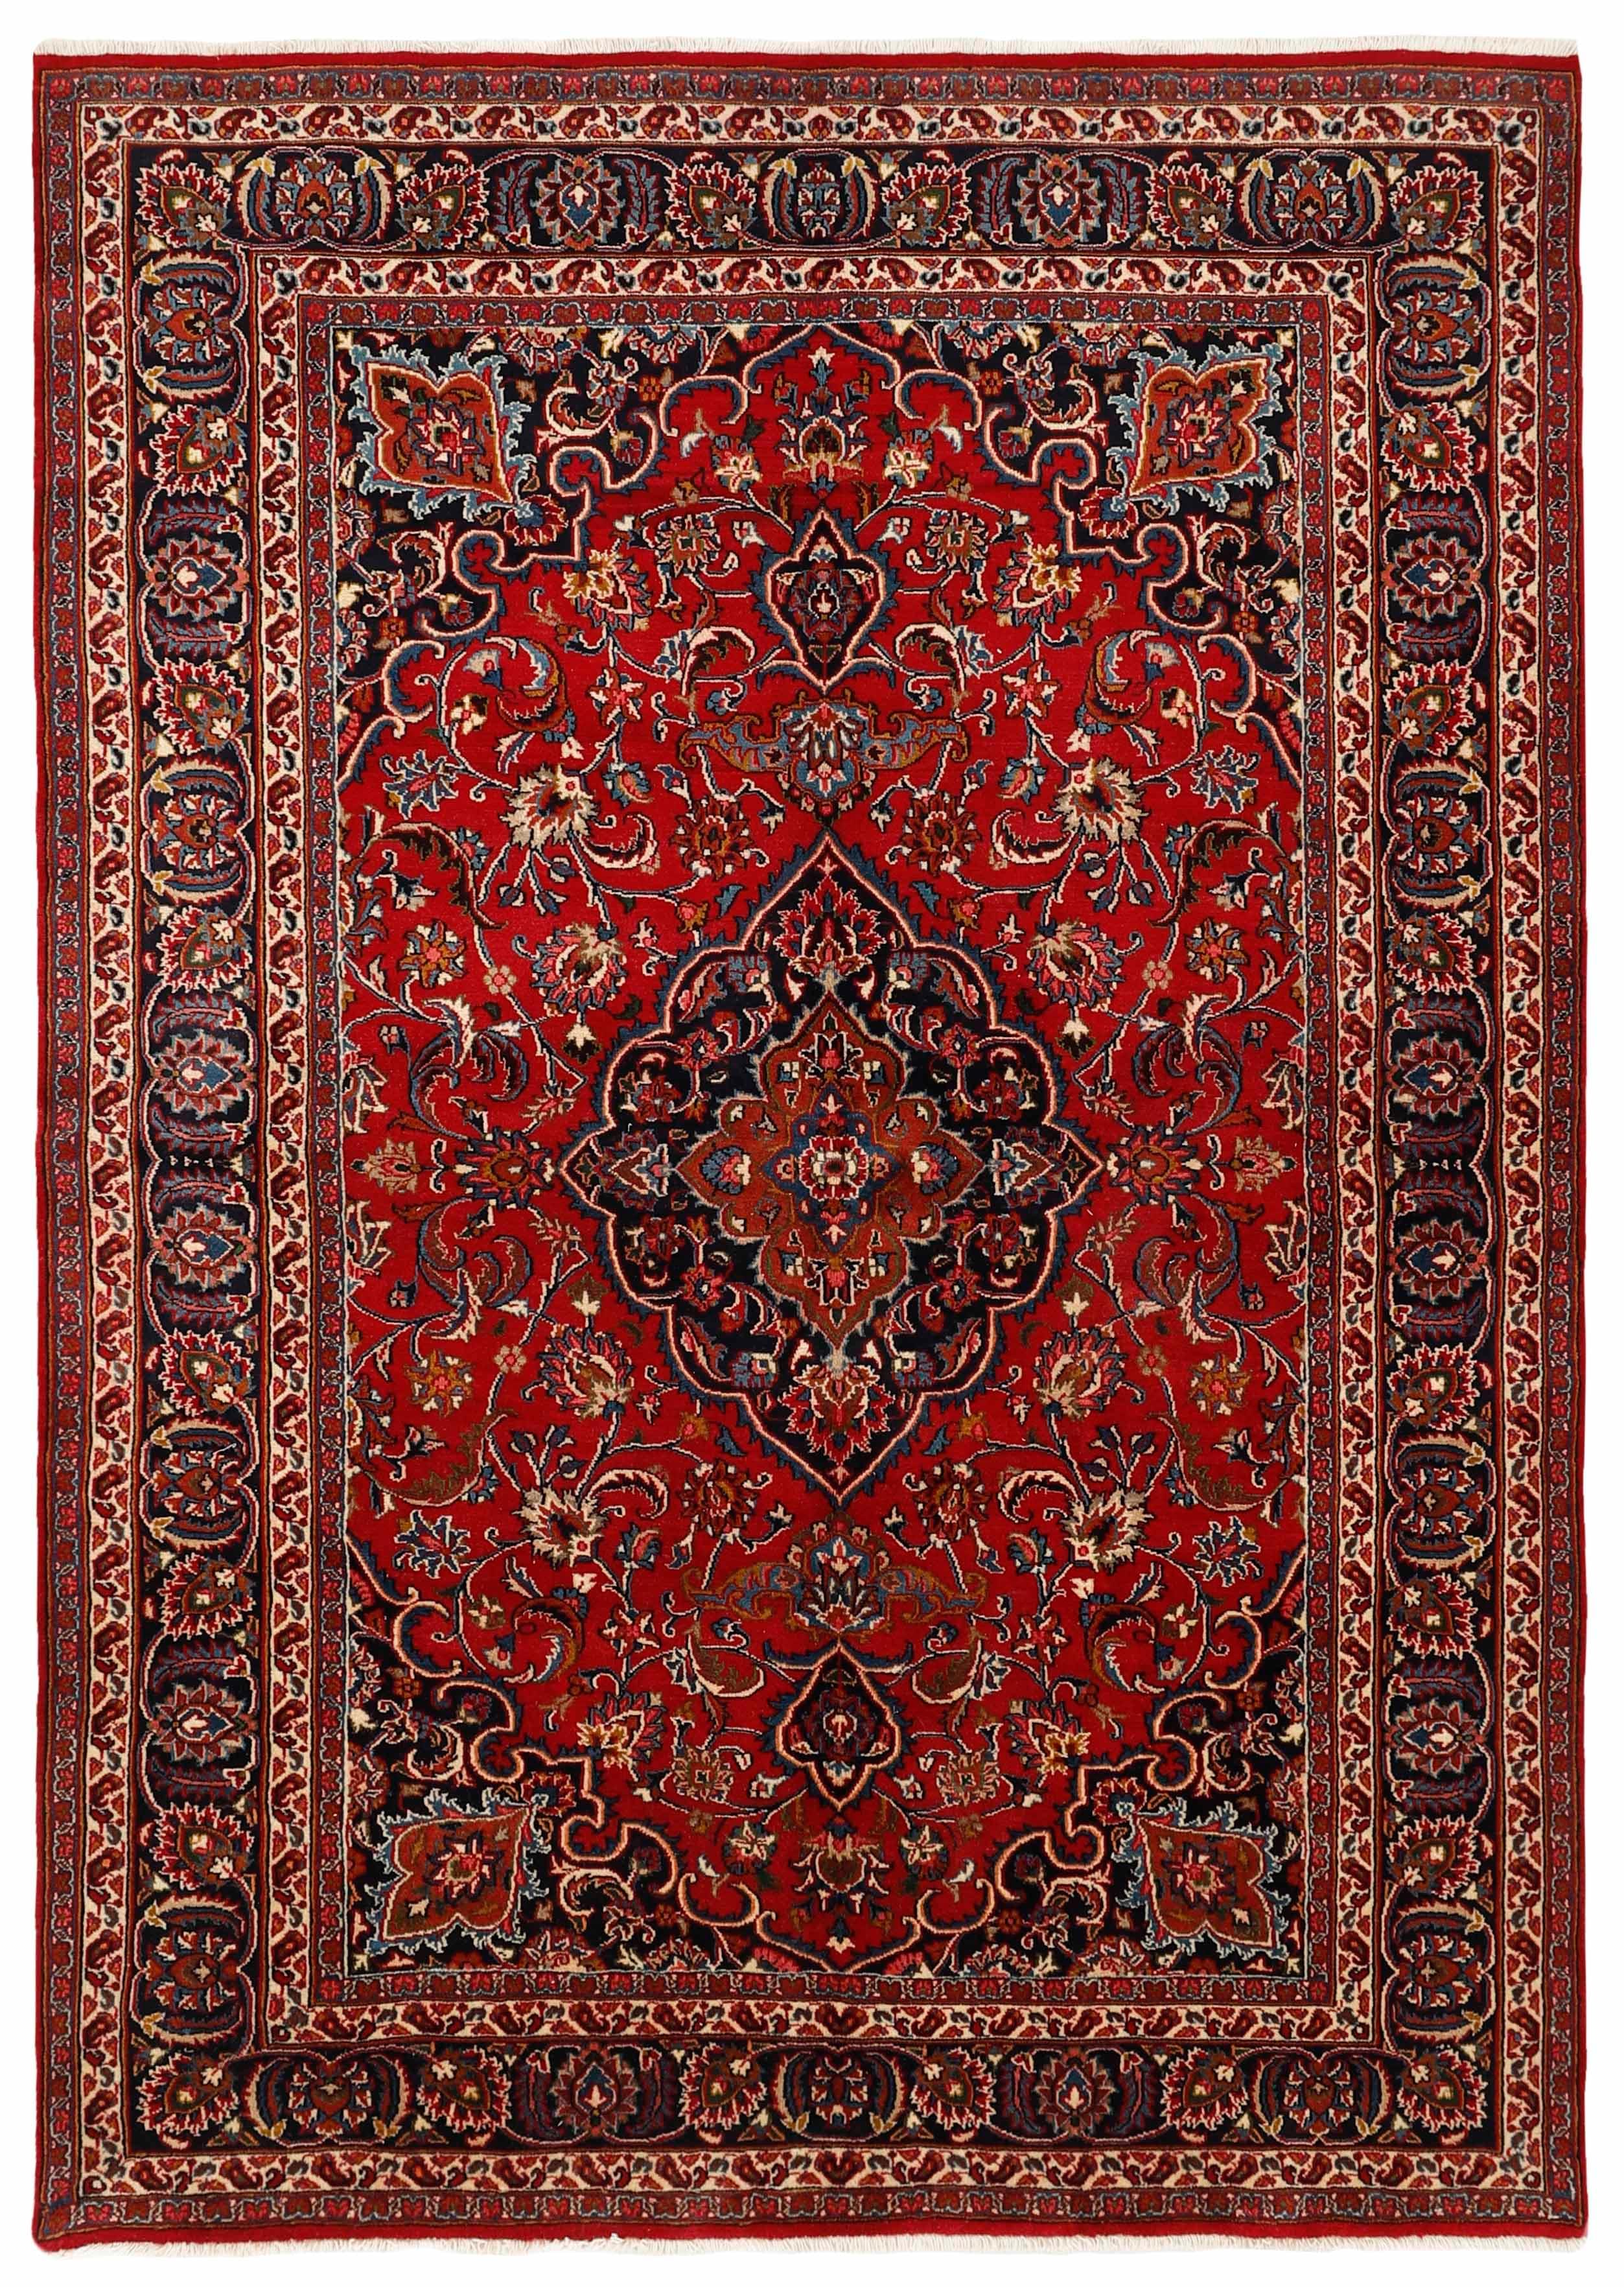 Authentic persian kelim flatweave rug with traditional design in red, blue and beige